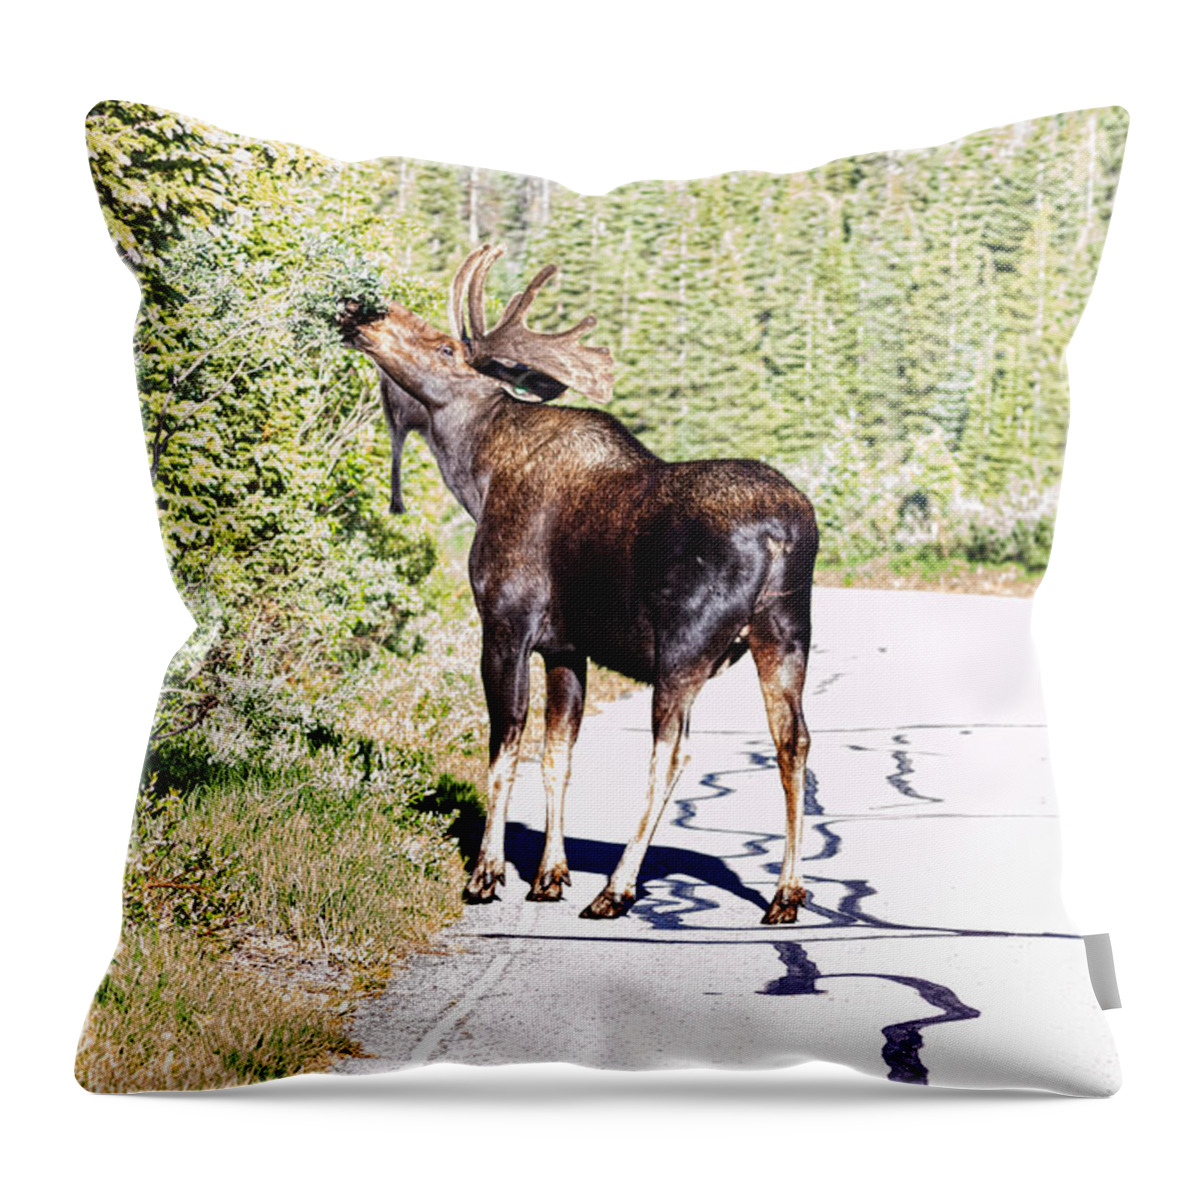 Moose Throw Pillow featuring the photograph Bull Moose Munching in The Road by James BO Insogna